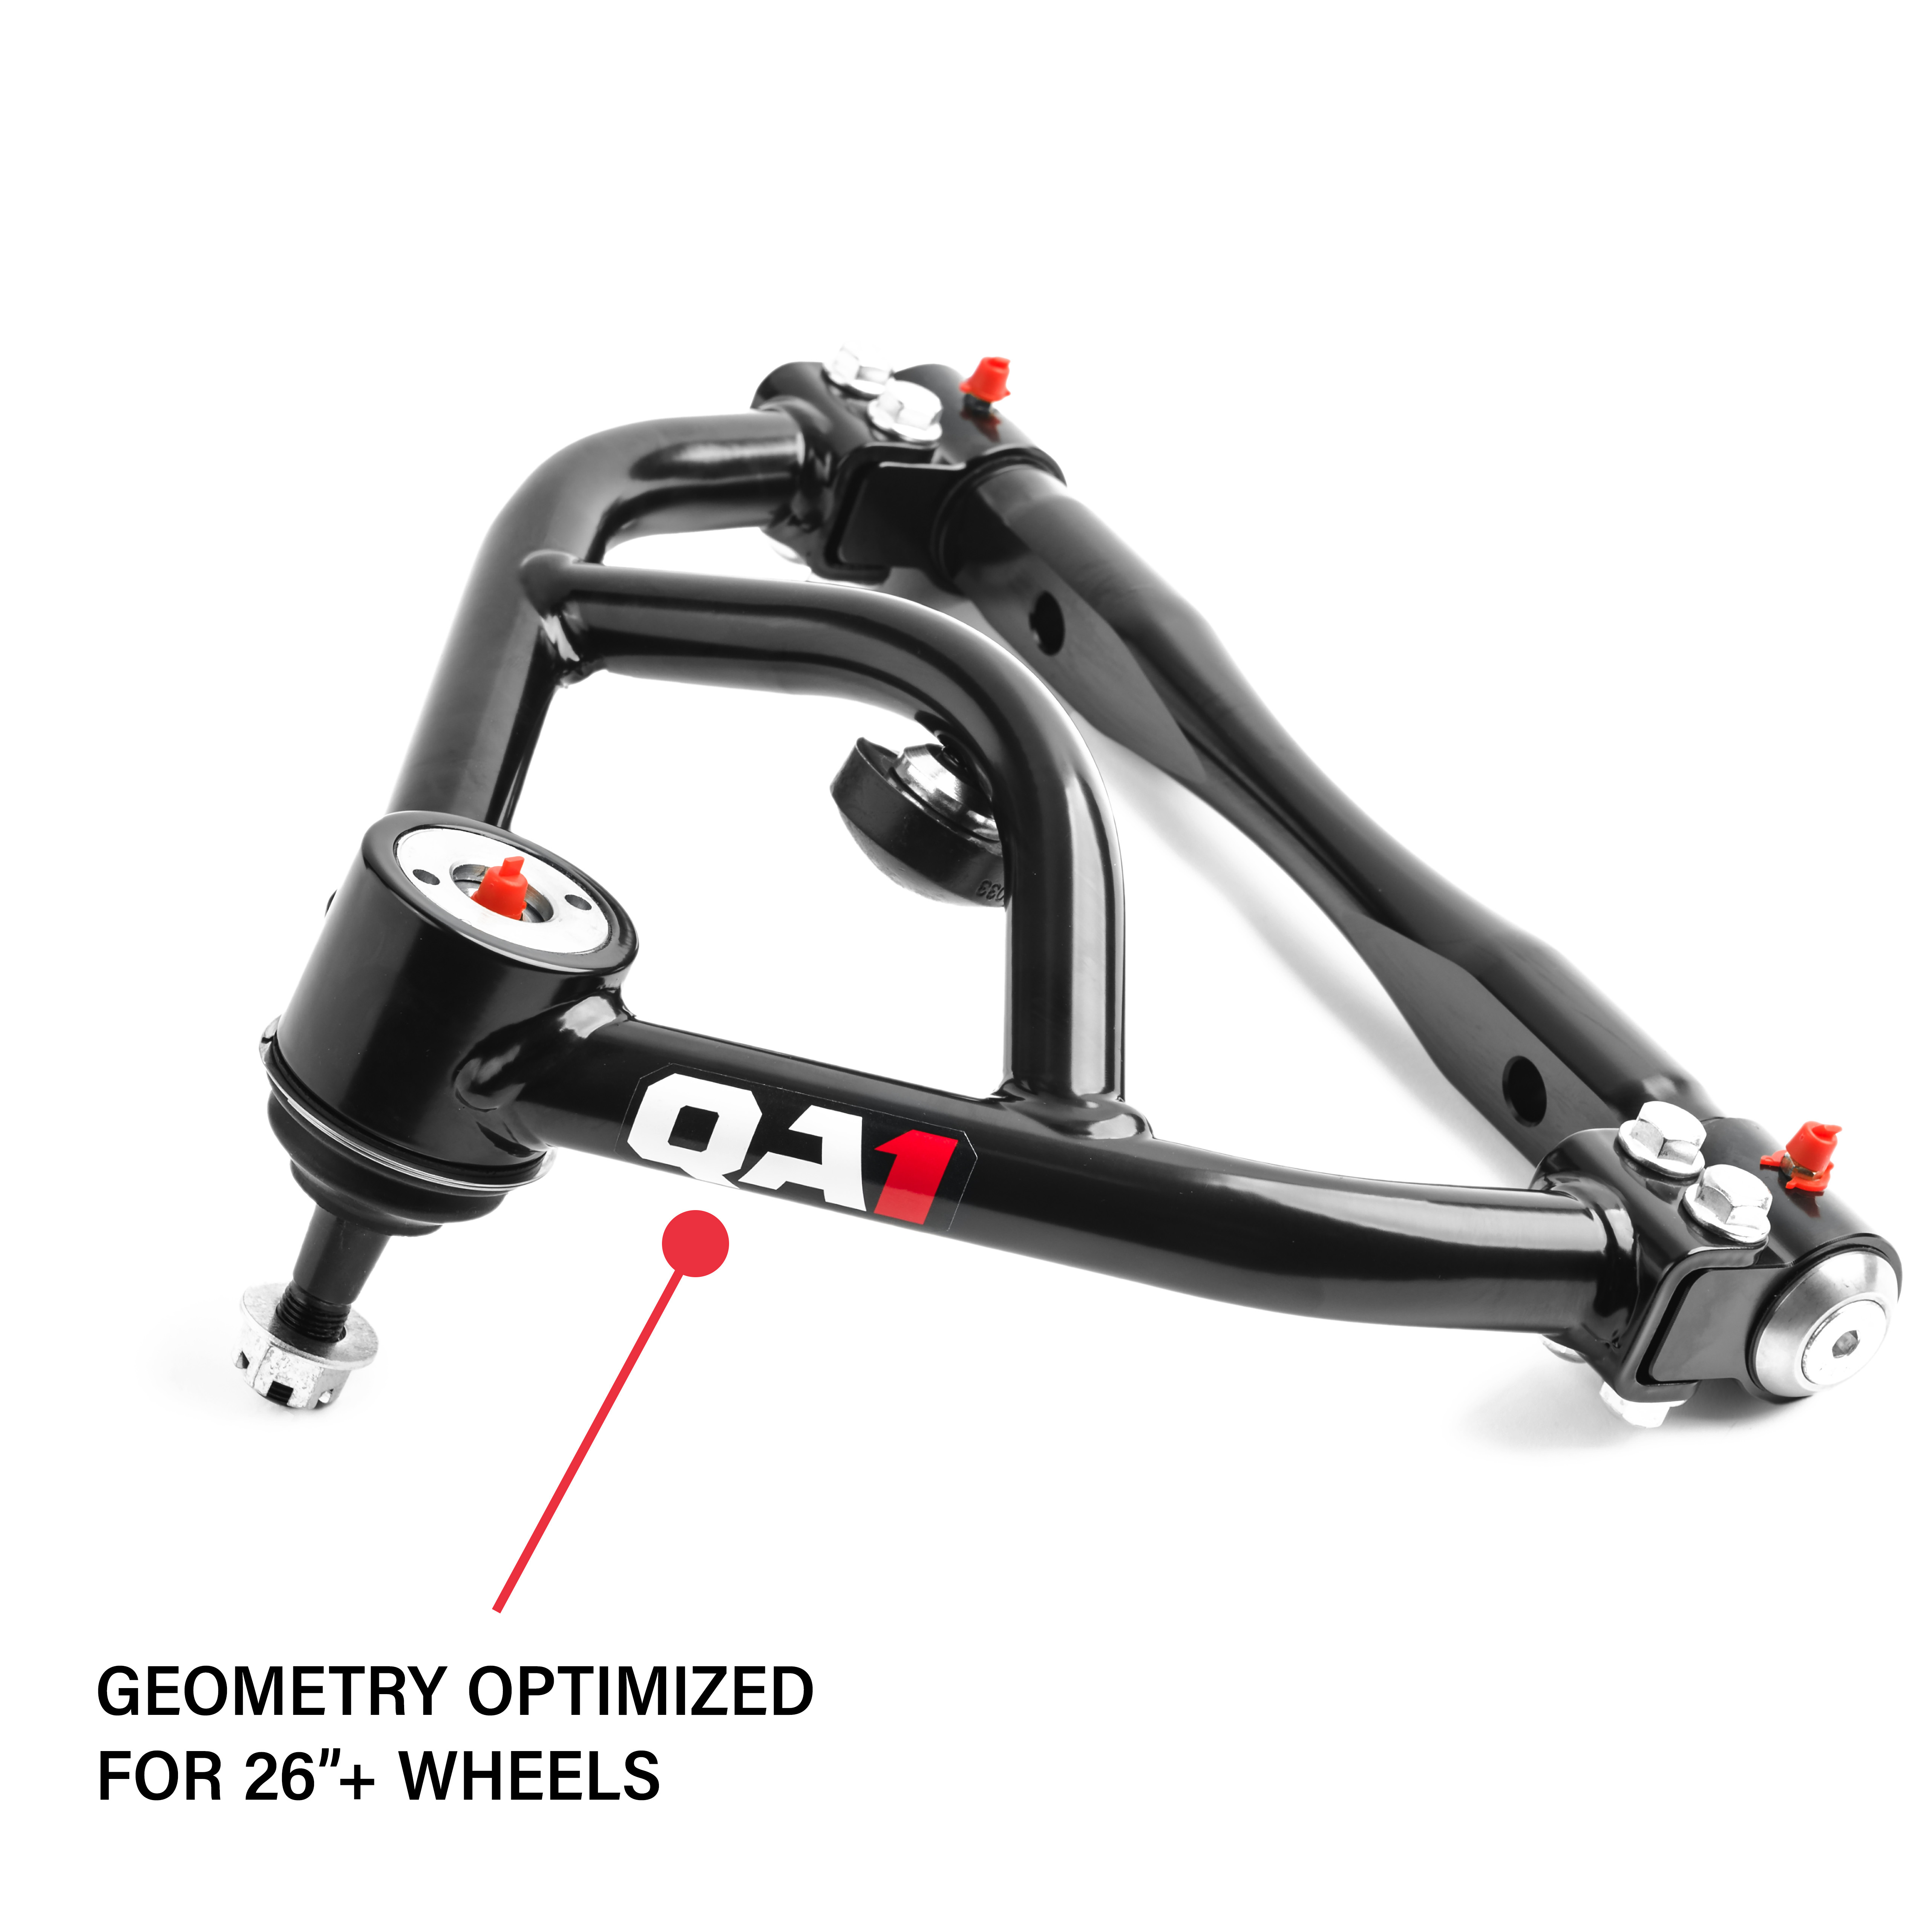 Control arm geometry optimized for 26 inch + wheels